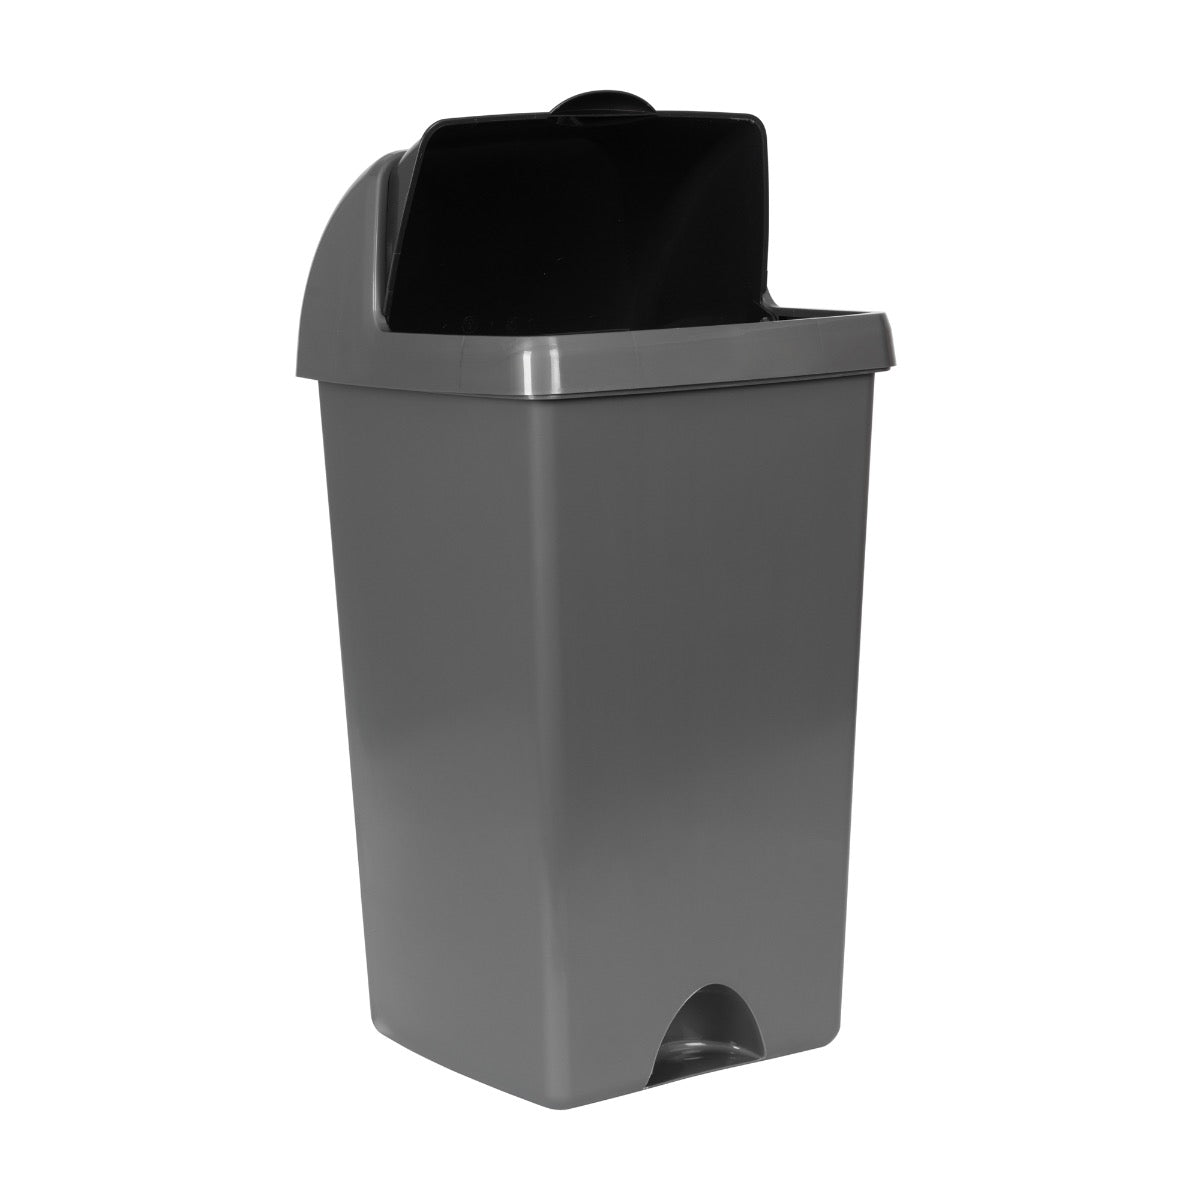 Purely Smile Roll Top Bin Grey 50 Litre